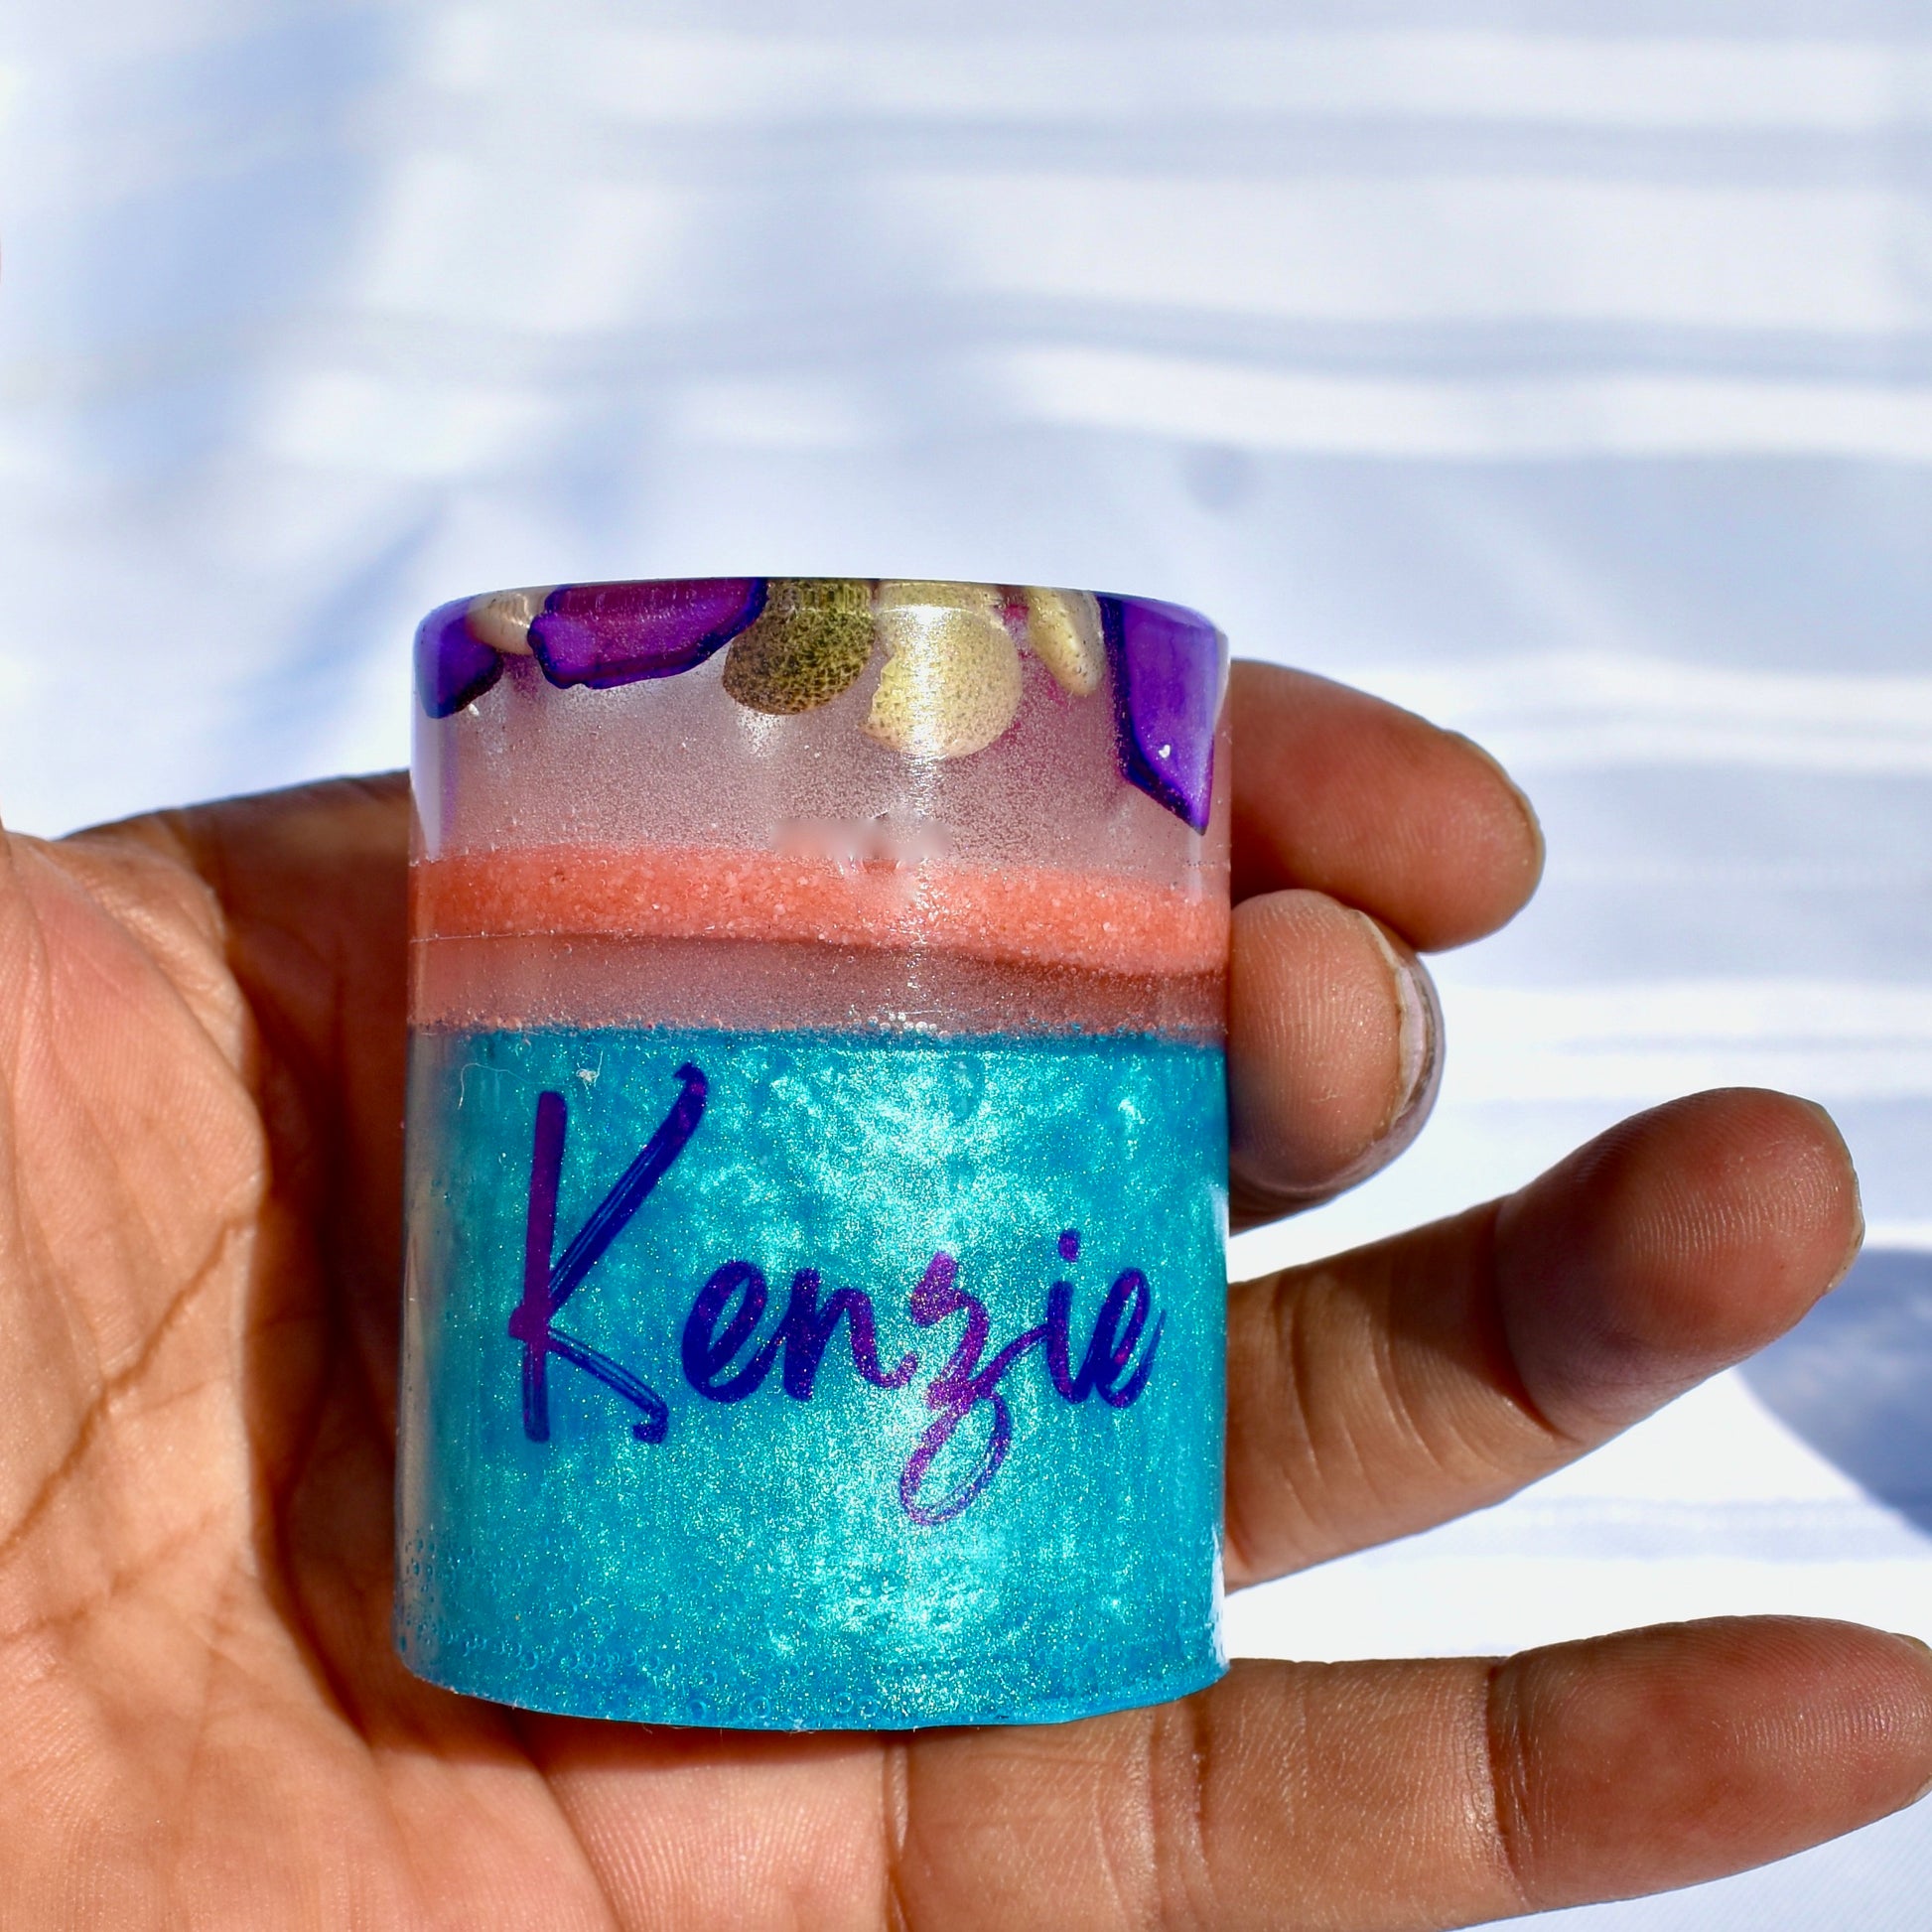 Seashell resin shot glass personalized with a name.